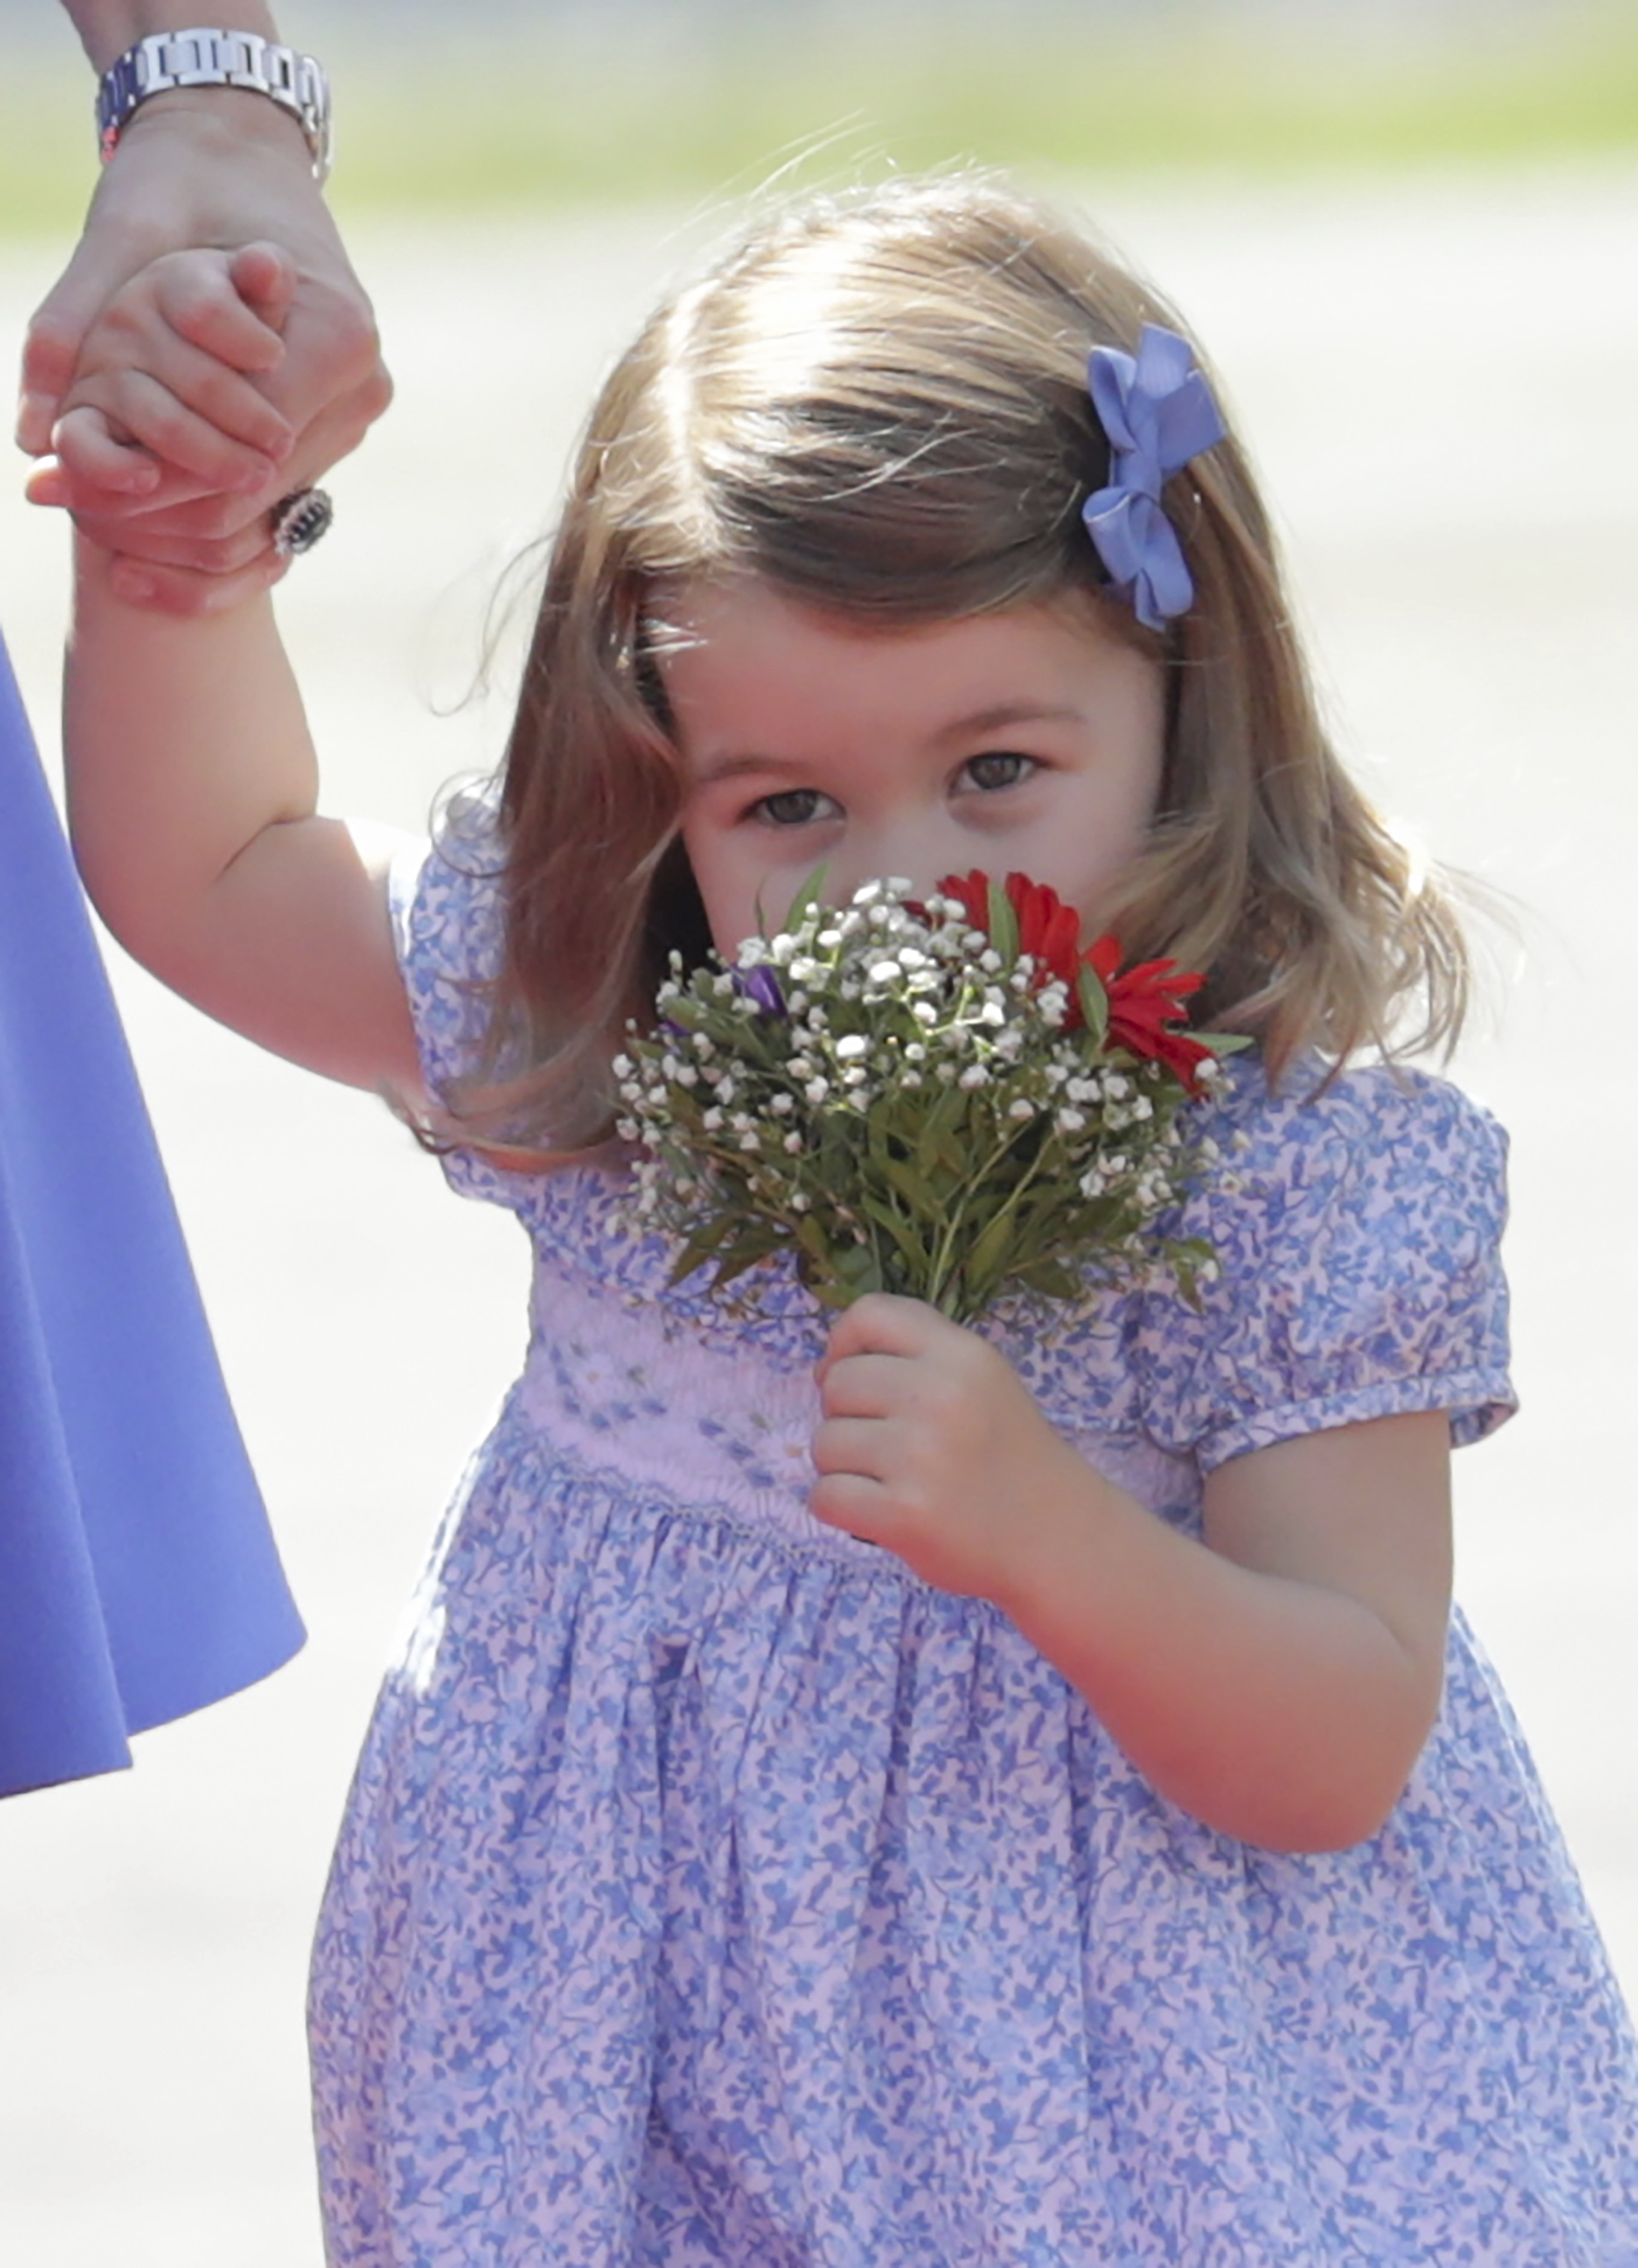 Charlotte, the daughter of Britain's Prince William and his wife Catherine, Duchess of Cambridge, smells a bunch of flowers after arriving at Tegel Airport in Berlin, Germany, 19 July 2017. Photo by: Kay Nietfeld/picture-alliance/dpa/AP Images